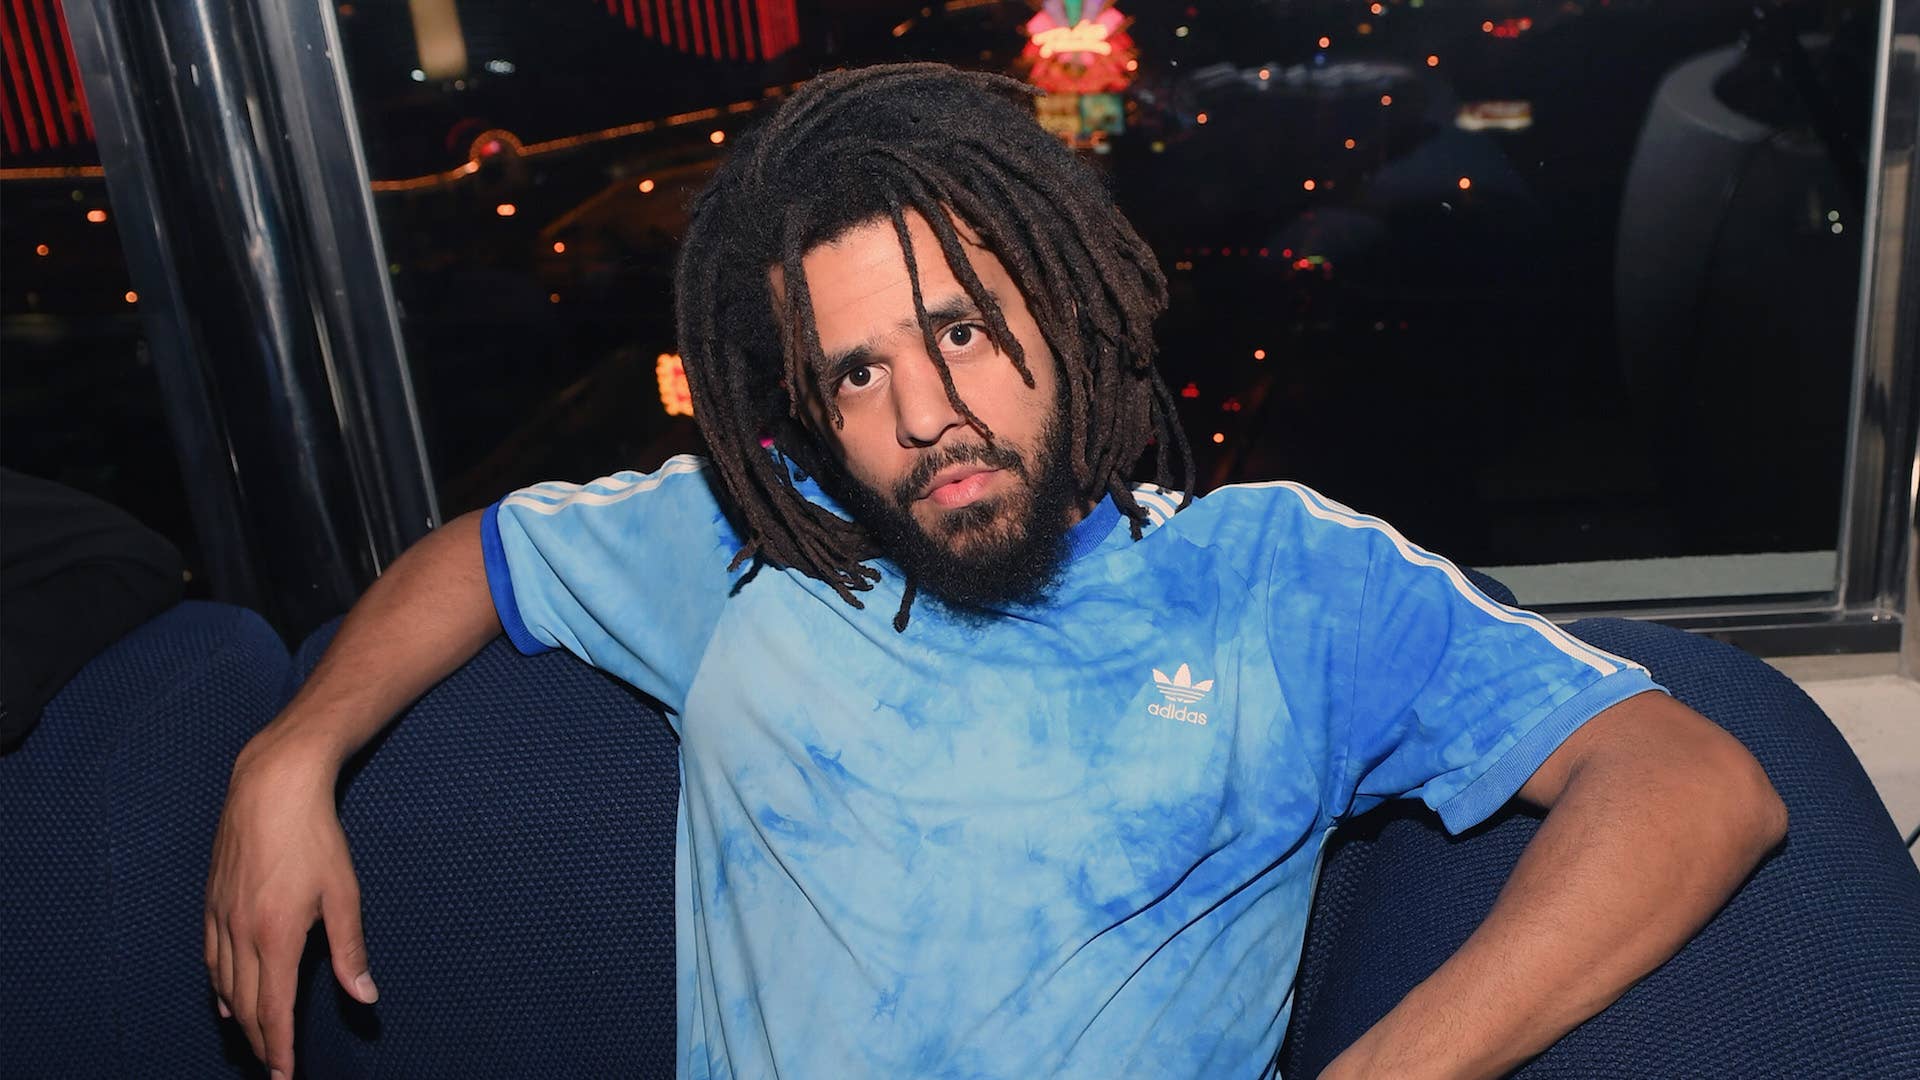 Recording artist J. Cole attends the Apex Social Club at Palms Casino Resort